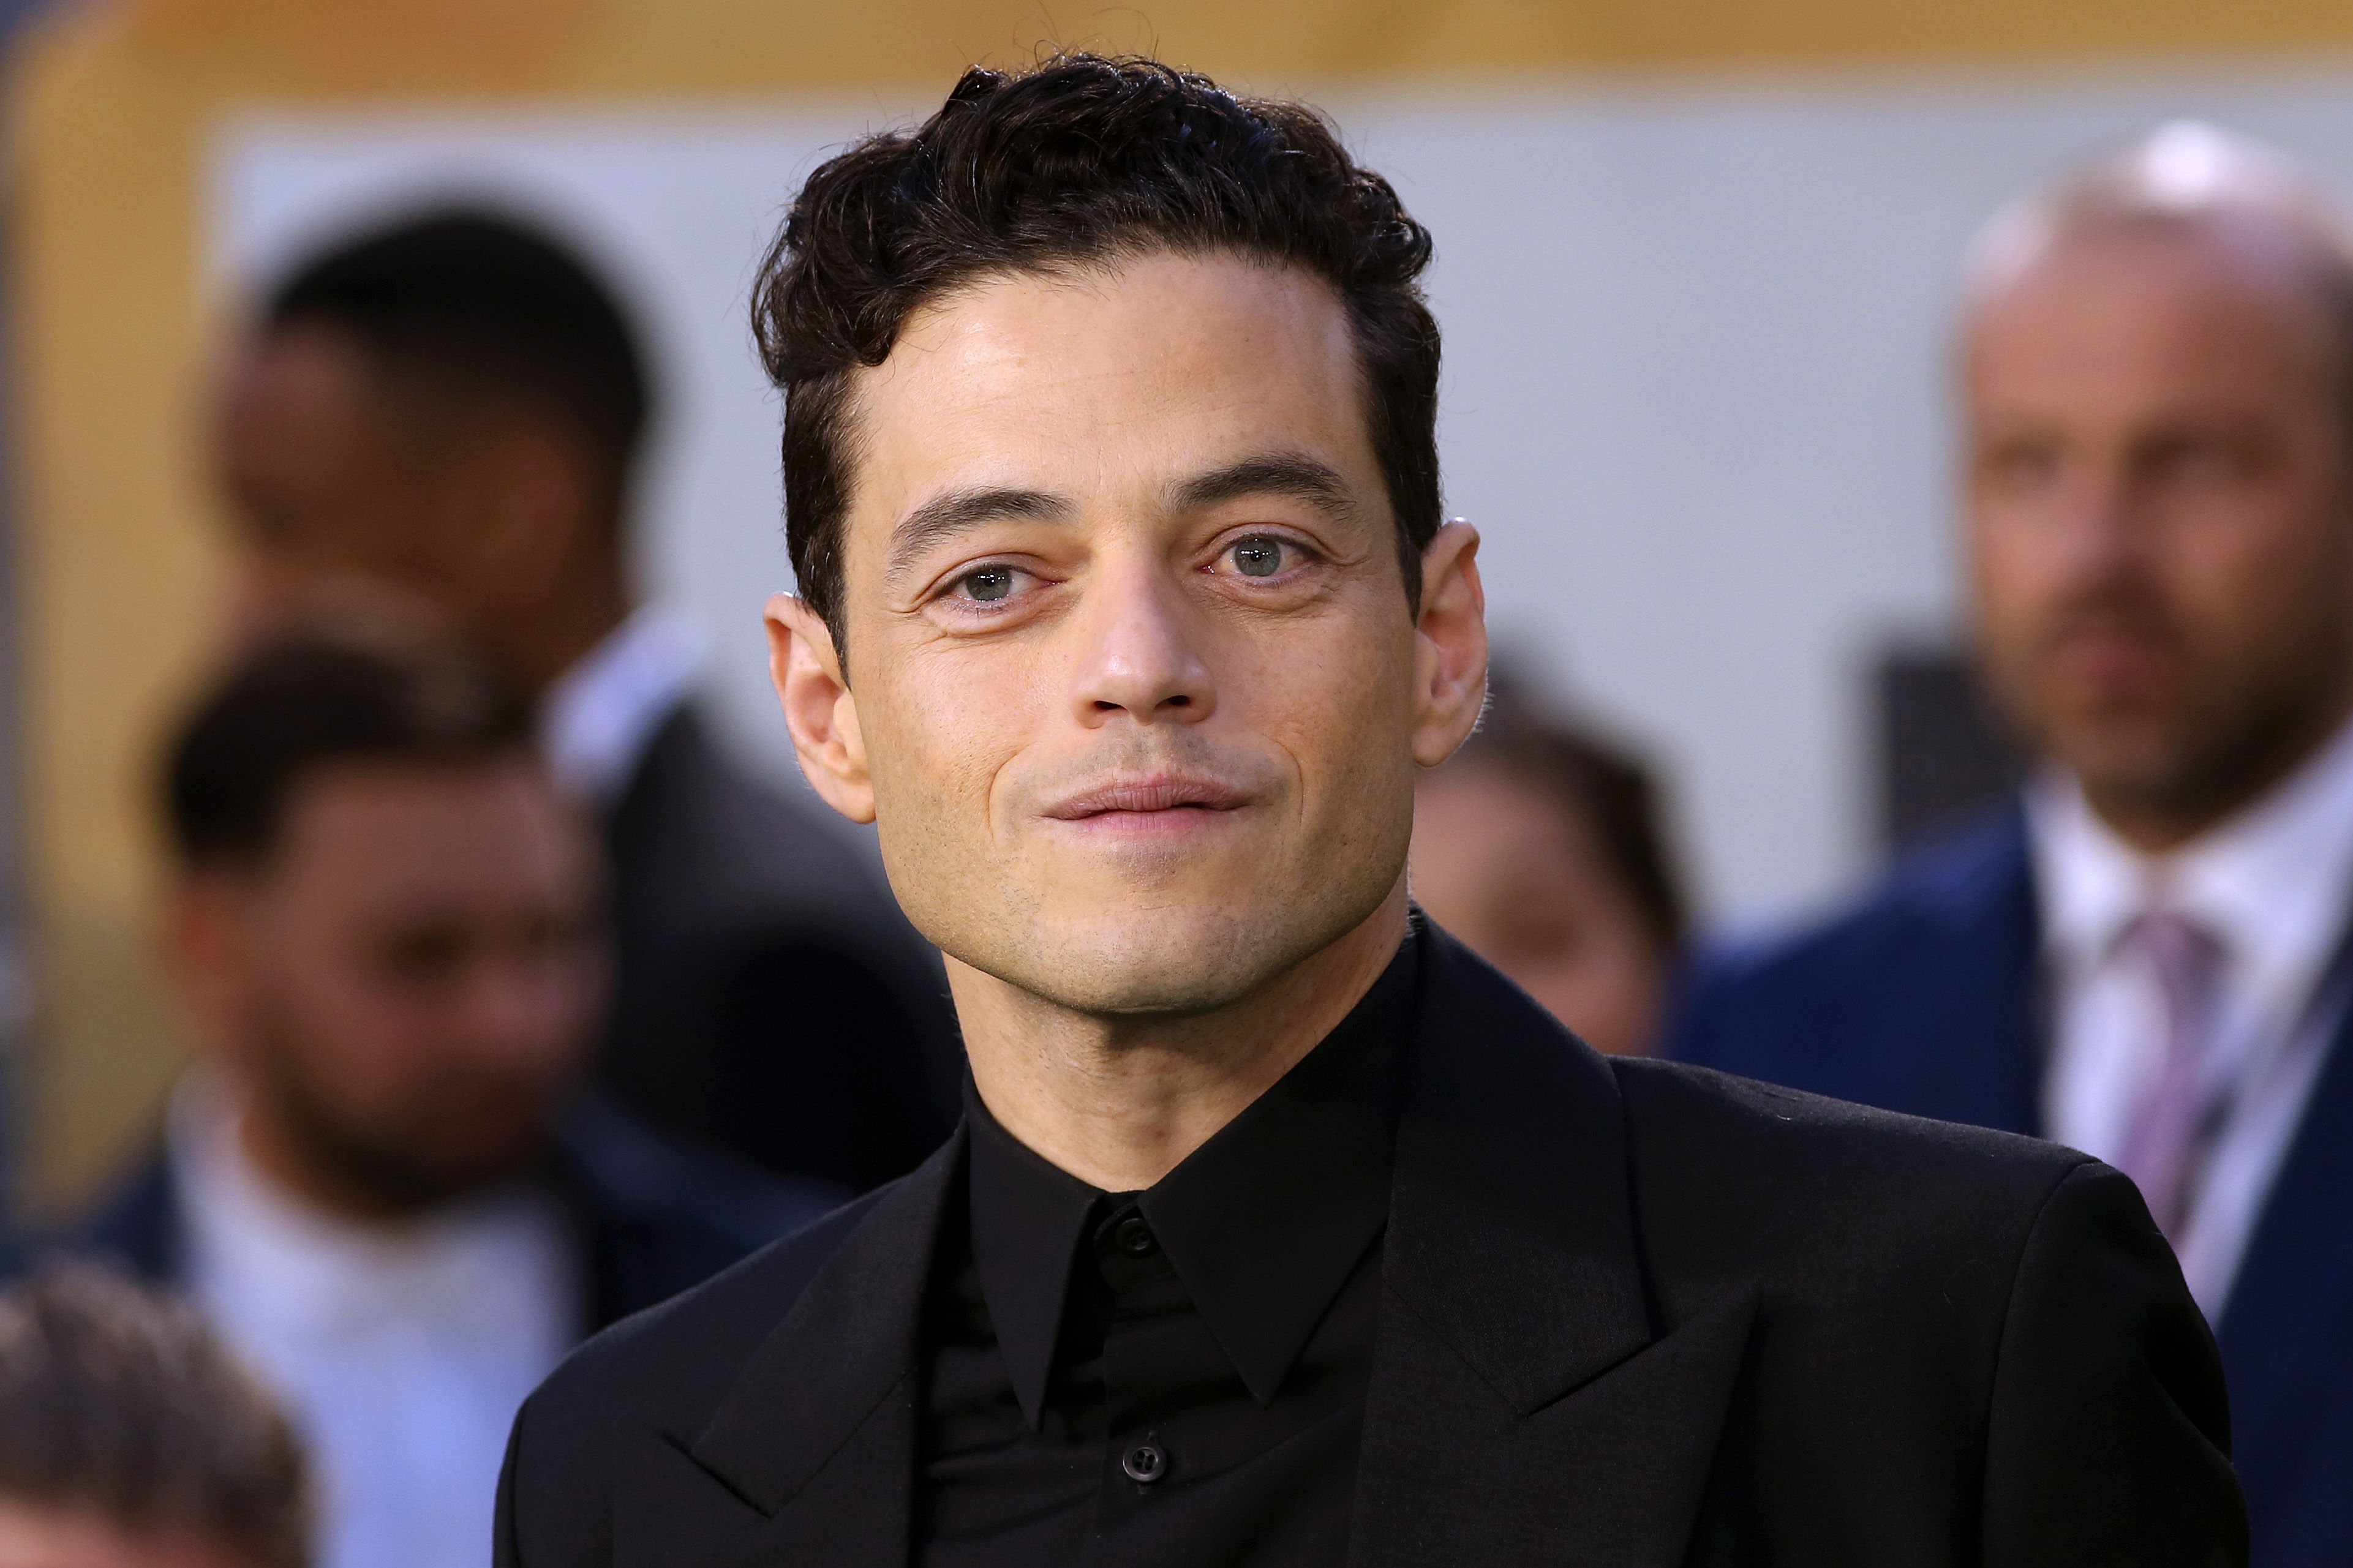 Bond star Rami Malek lines up return to TV in new role